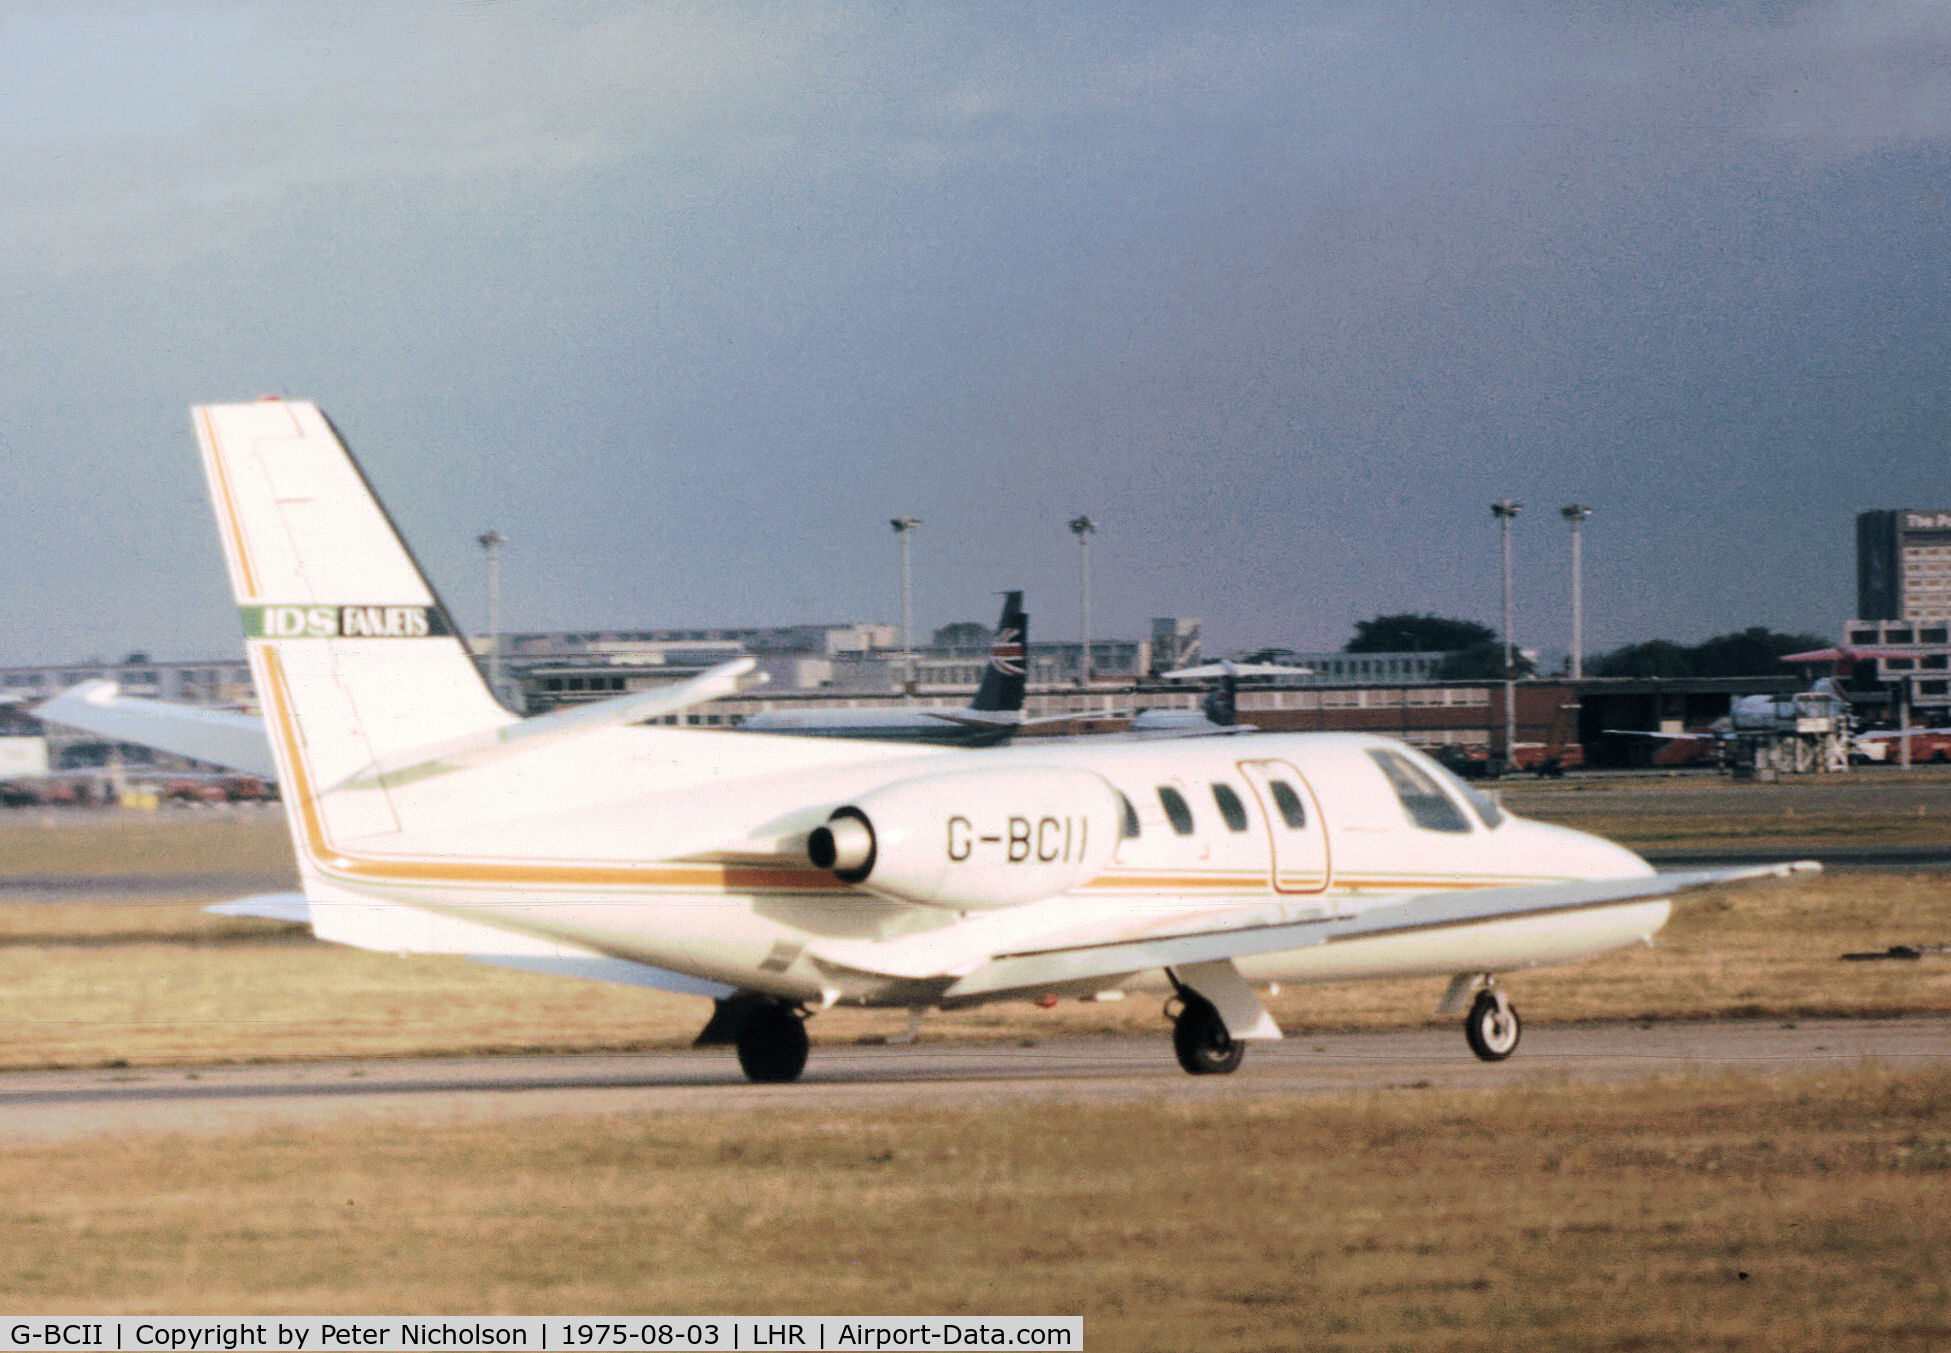 G-BCII, 1974 Cessna 500 Citation C/N 500-0176, Cessna 500 Citation of IDS Fanjets taxying at Heathrow in the Summer of 1975.